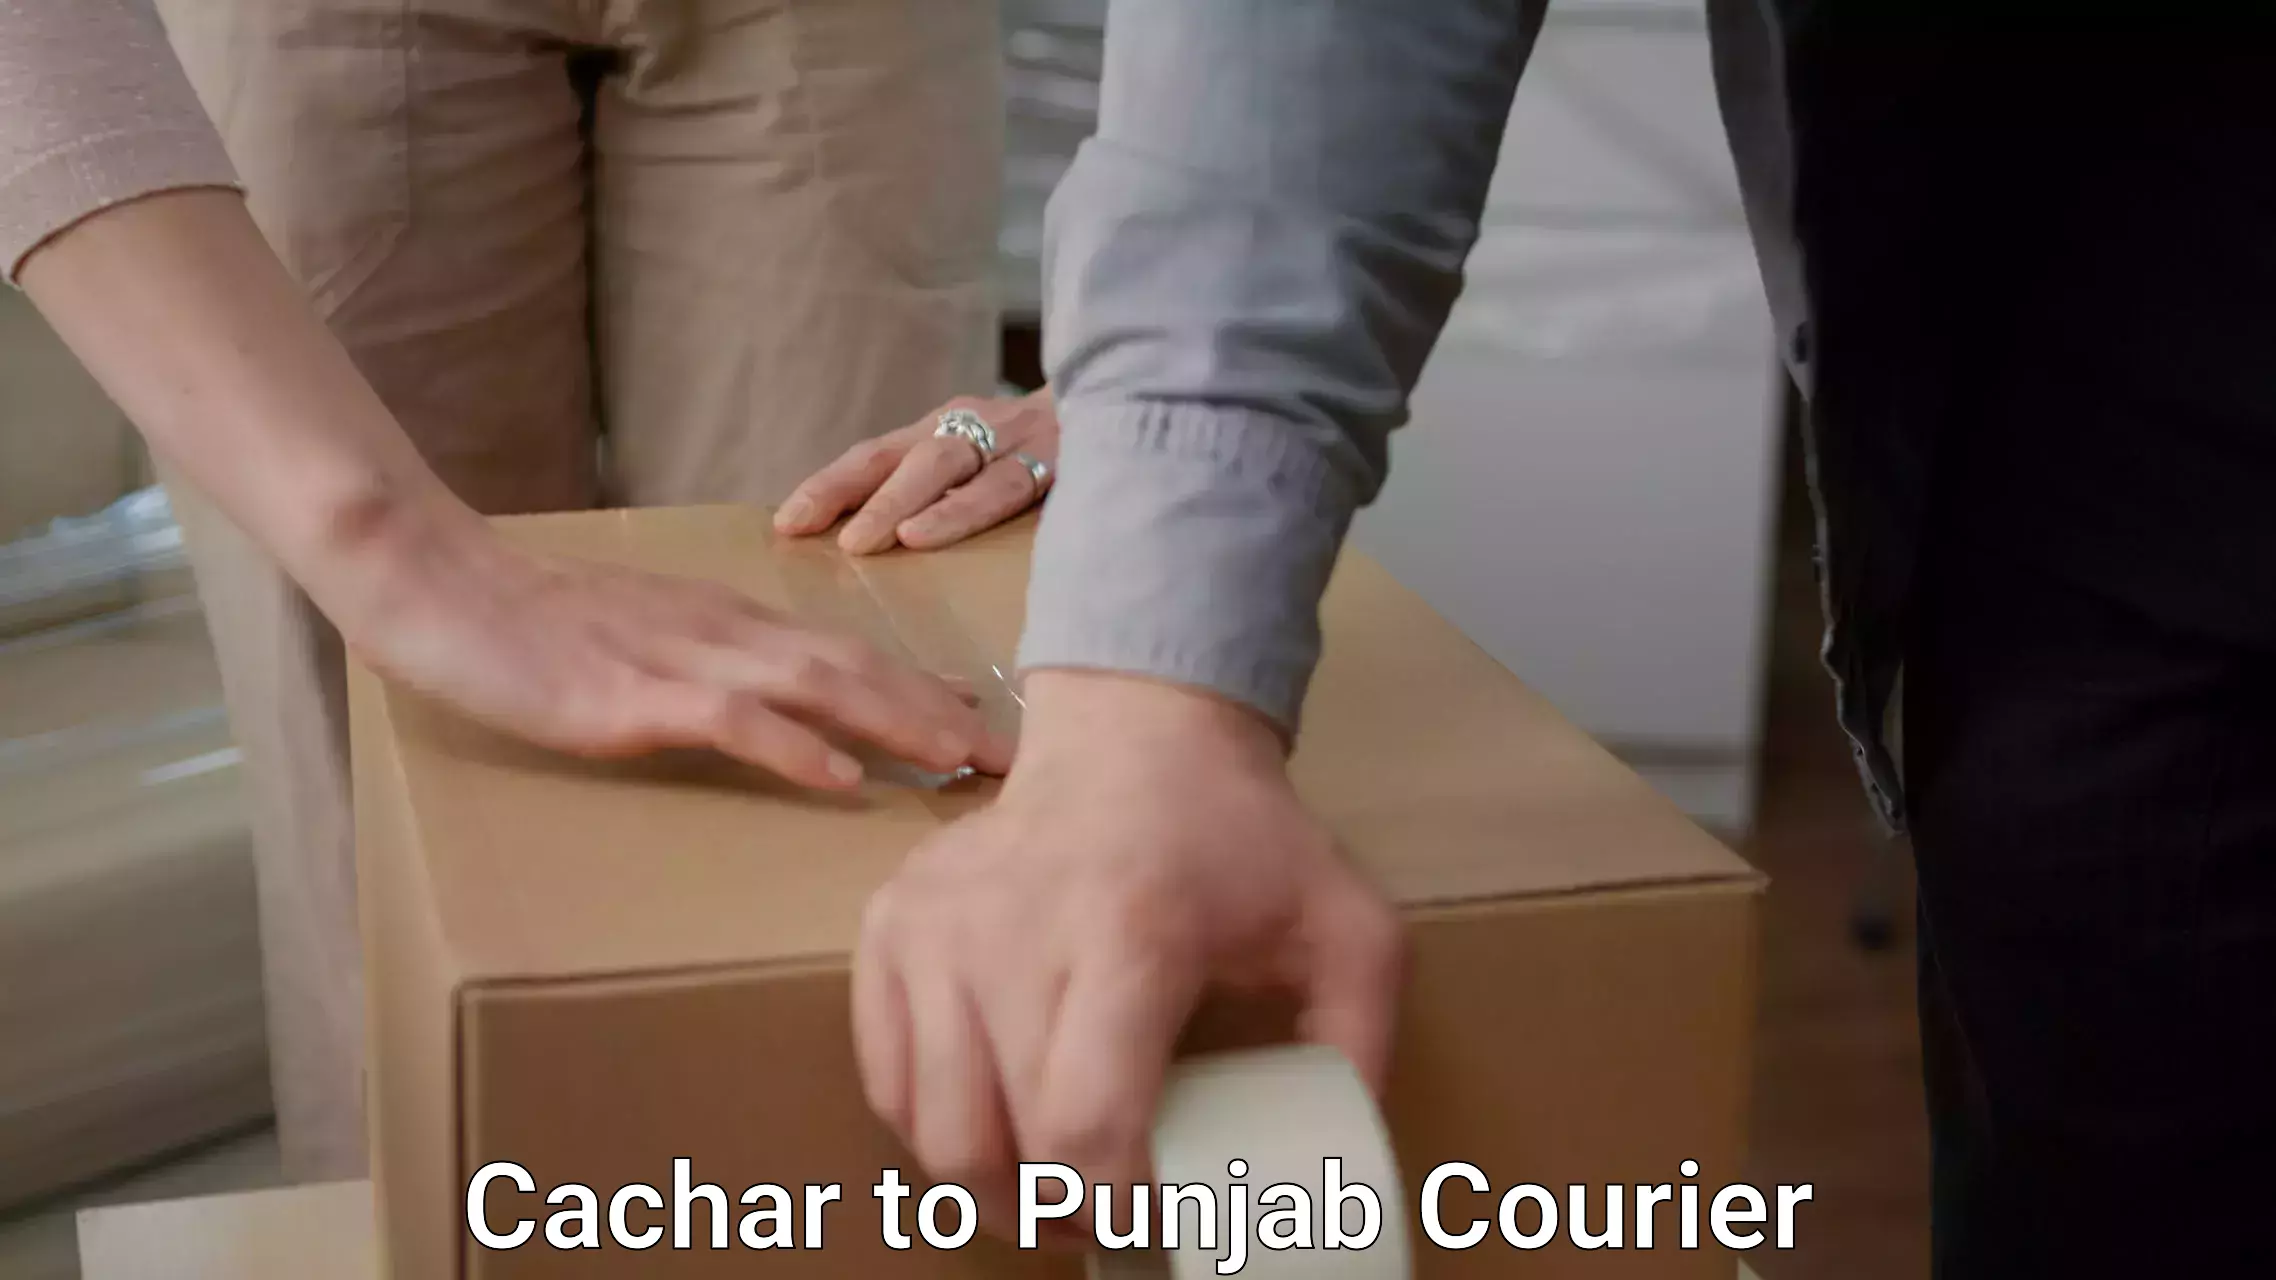 Furniture moving specialists Cachar to Amritsar